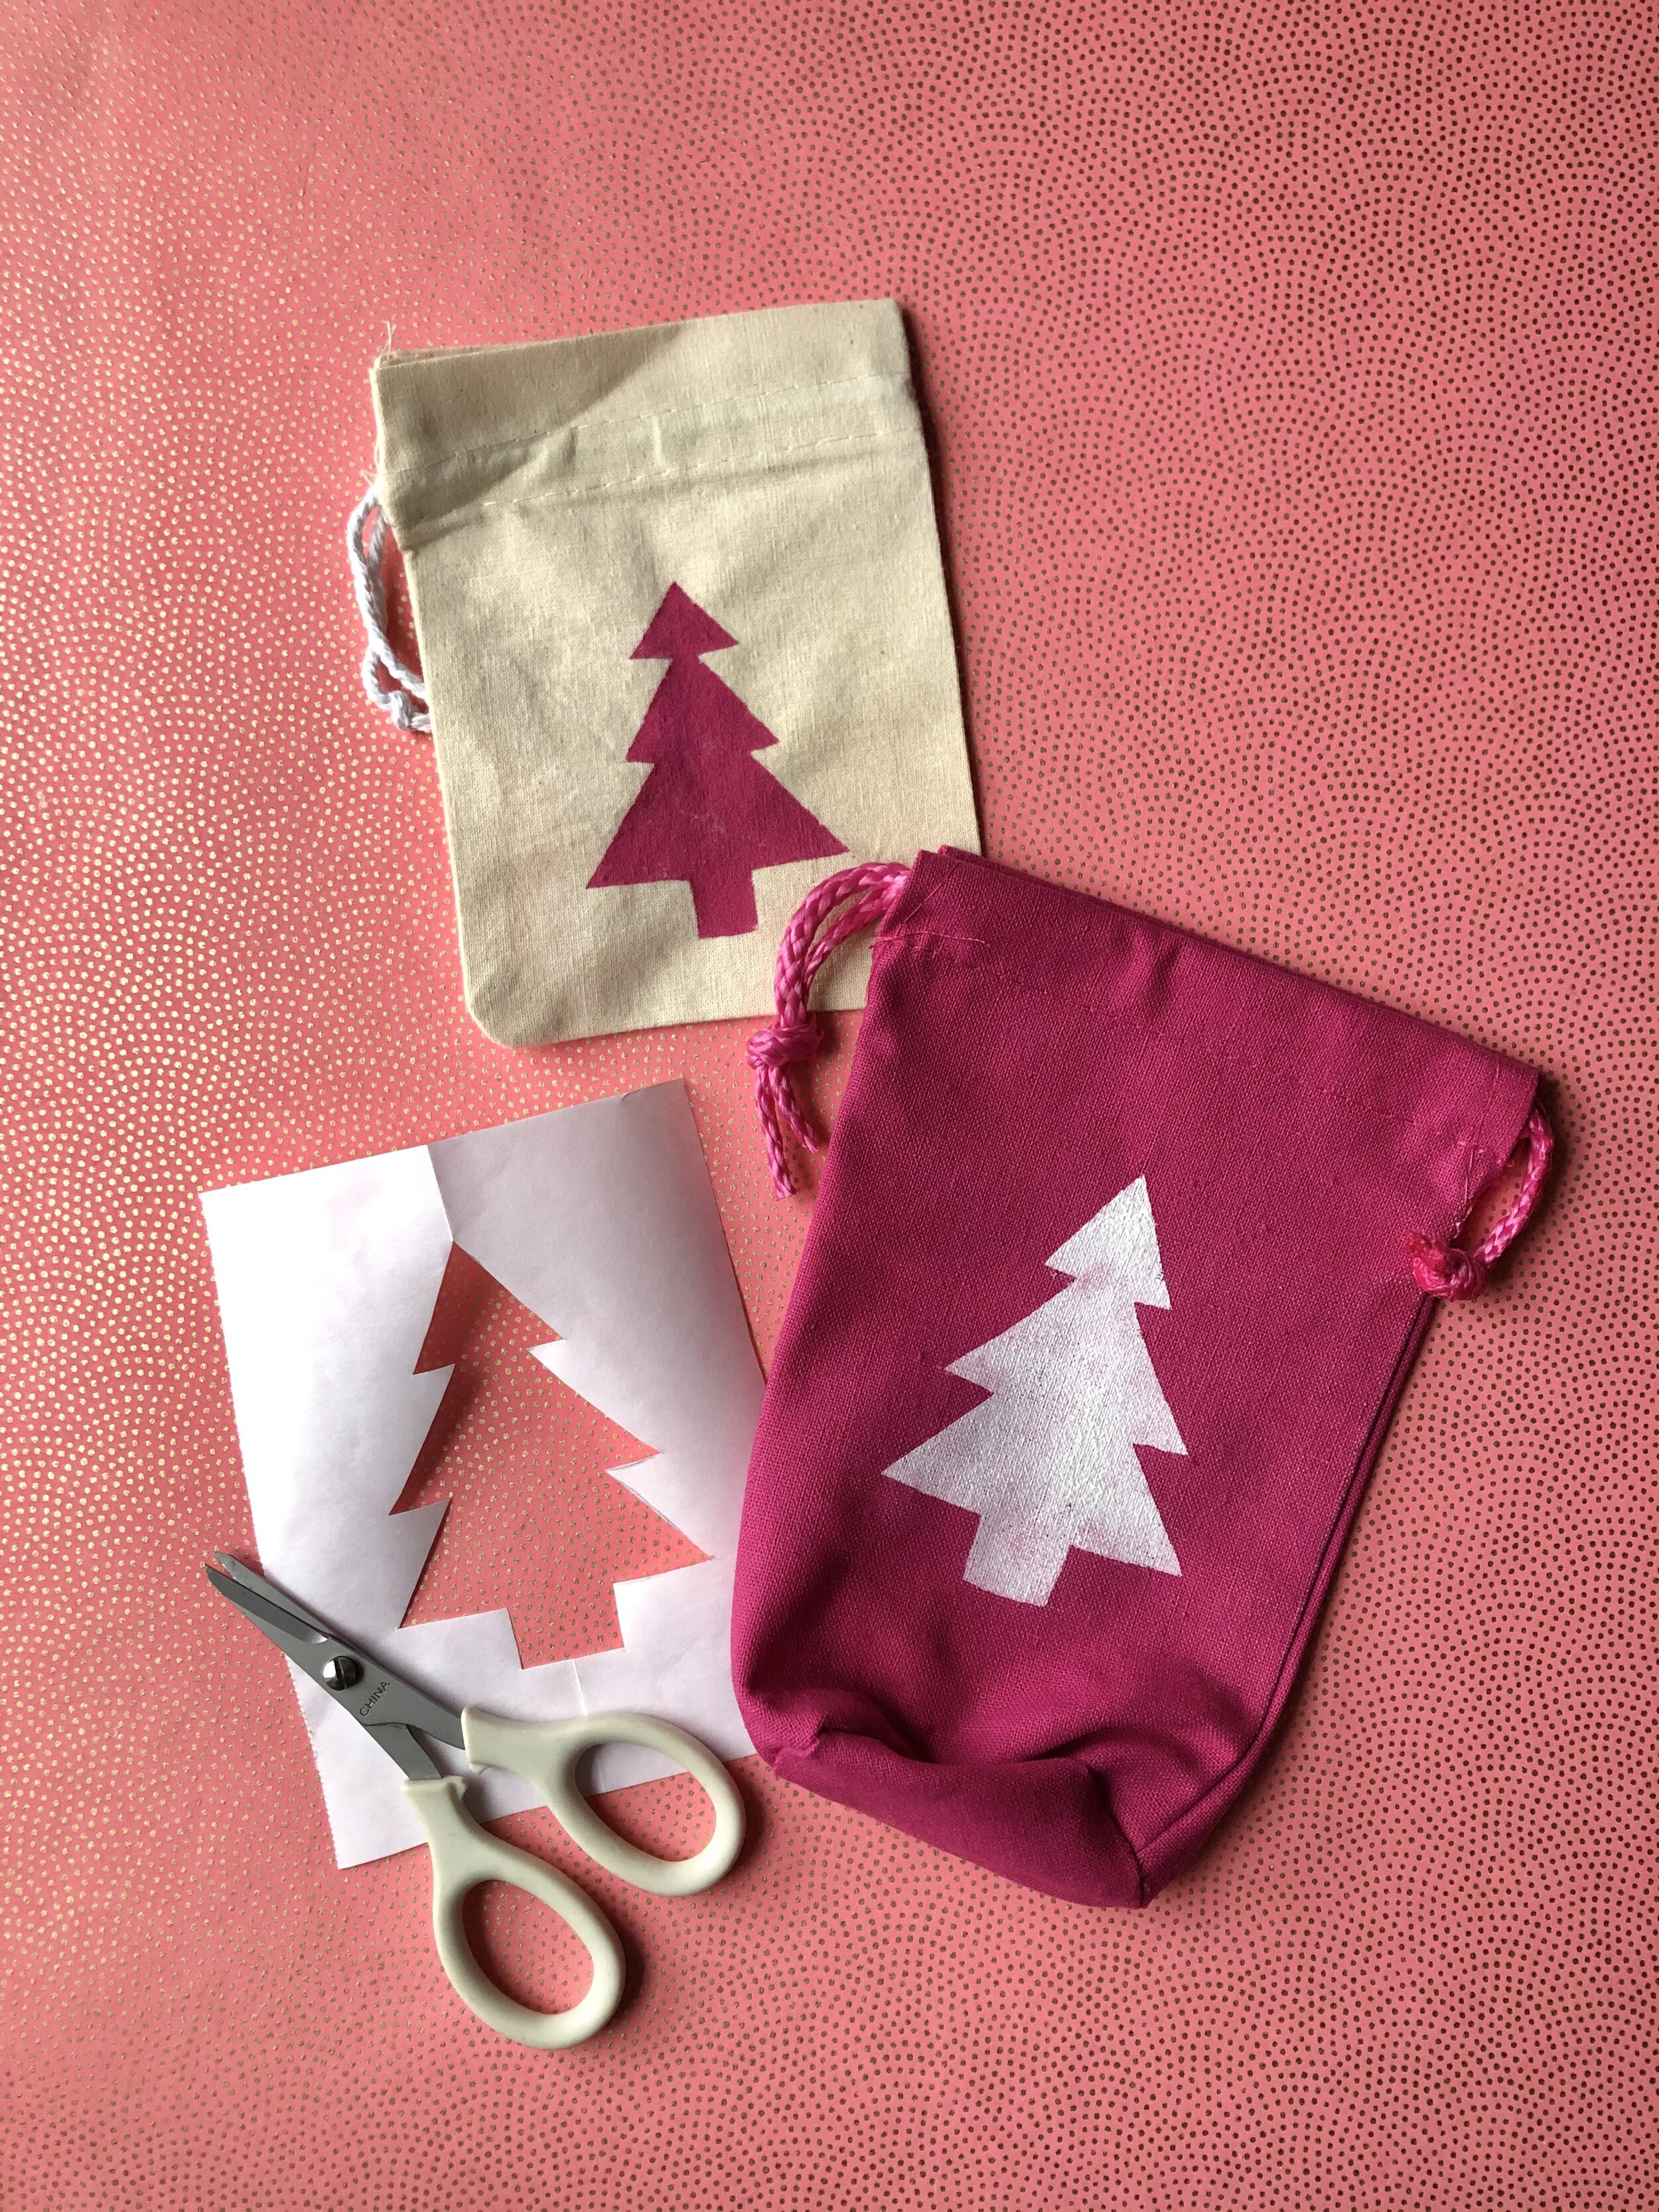 12 DIY Christmas Gift Bags Of Fabric And Paper - Shelterness